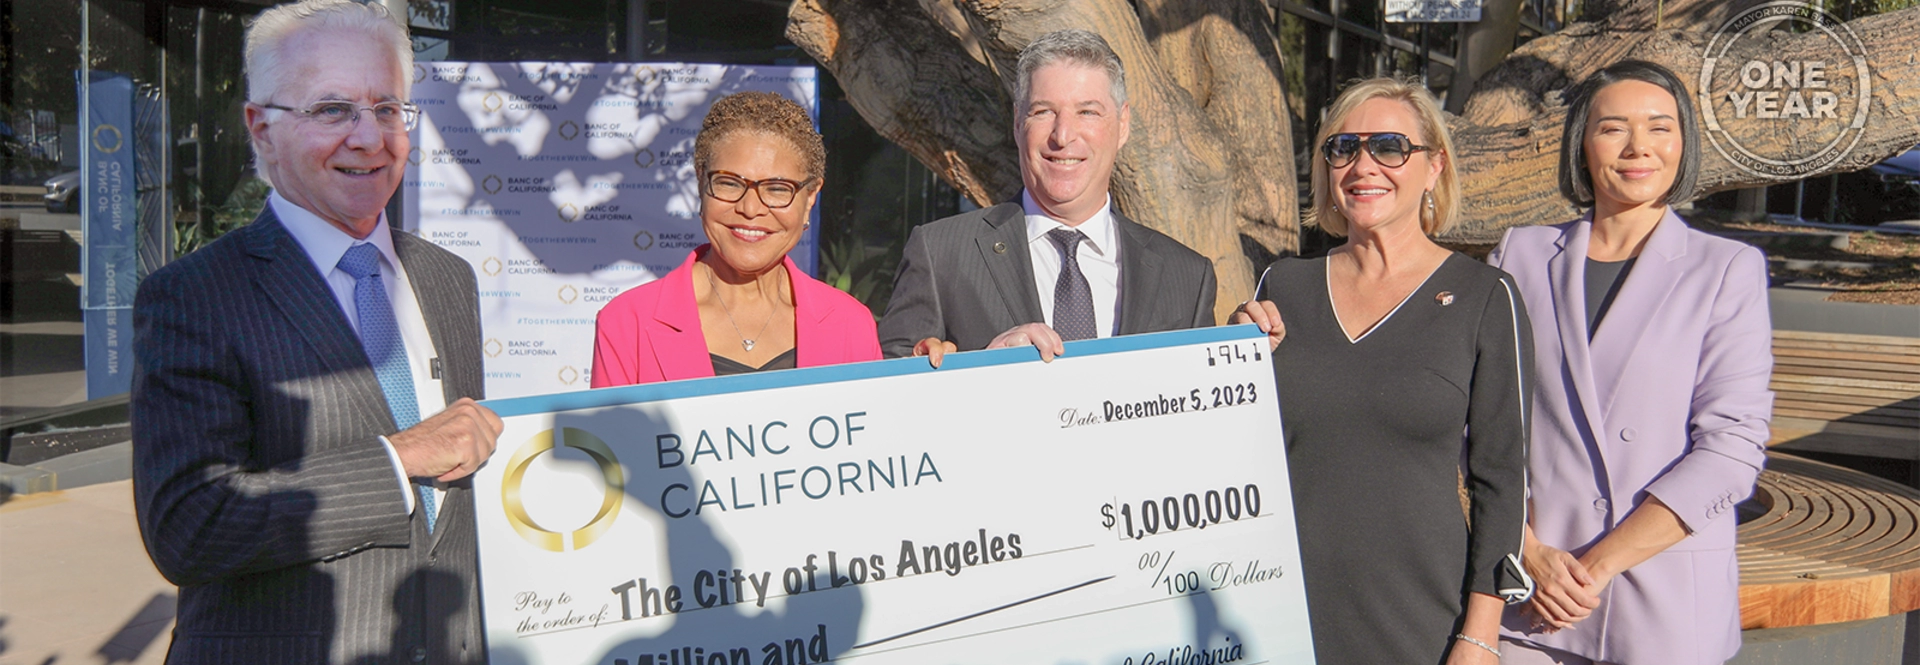 Mayor Karen Bass announcing Banc of California to Relocate to Los Angeles